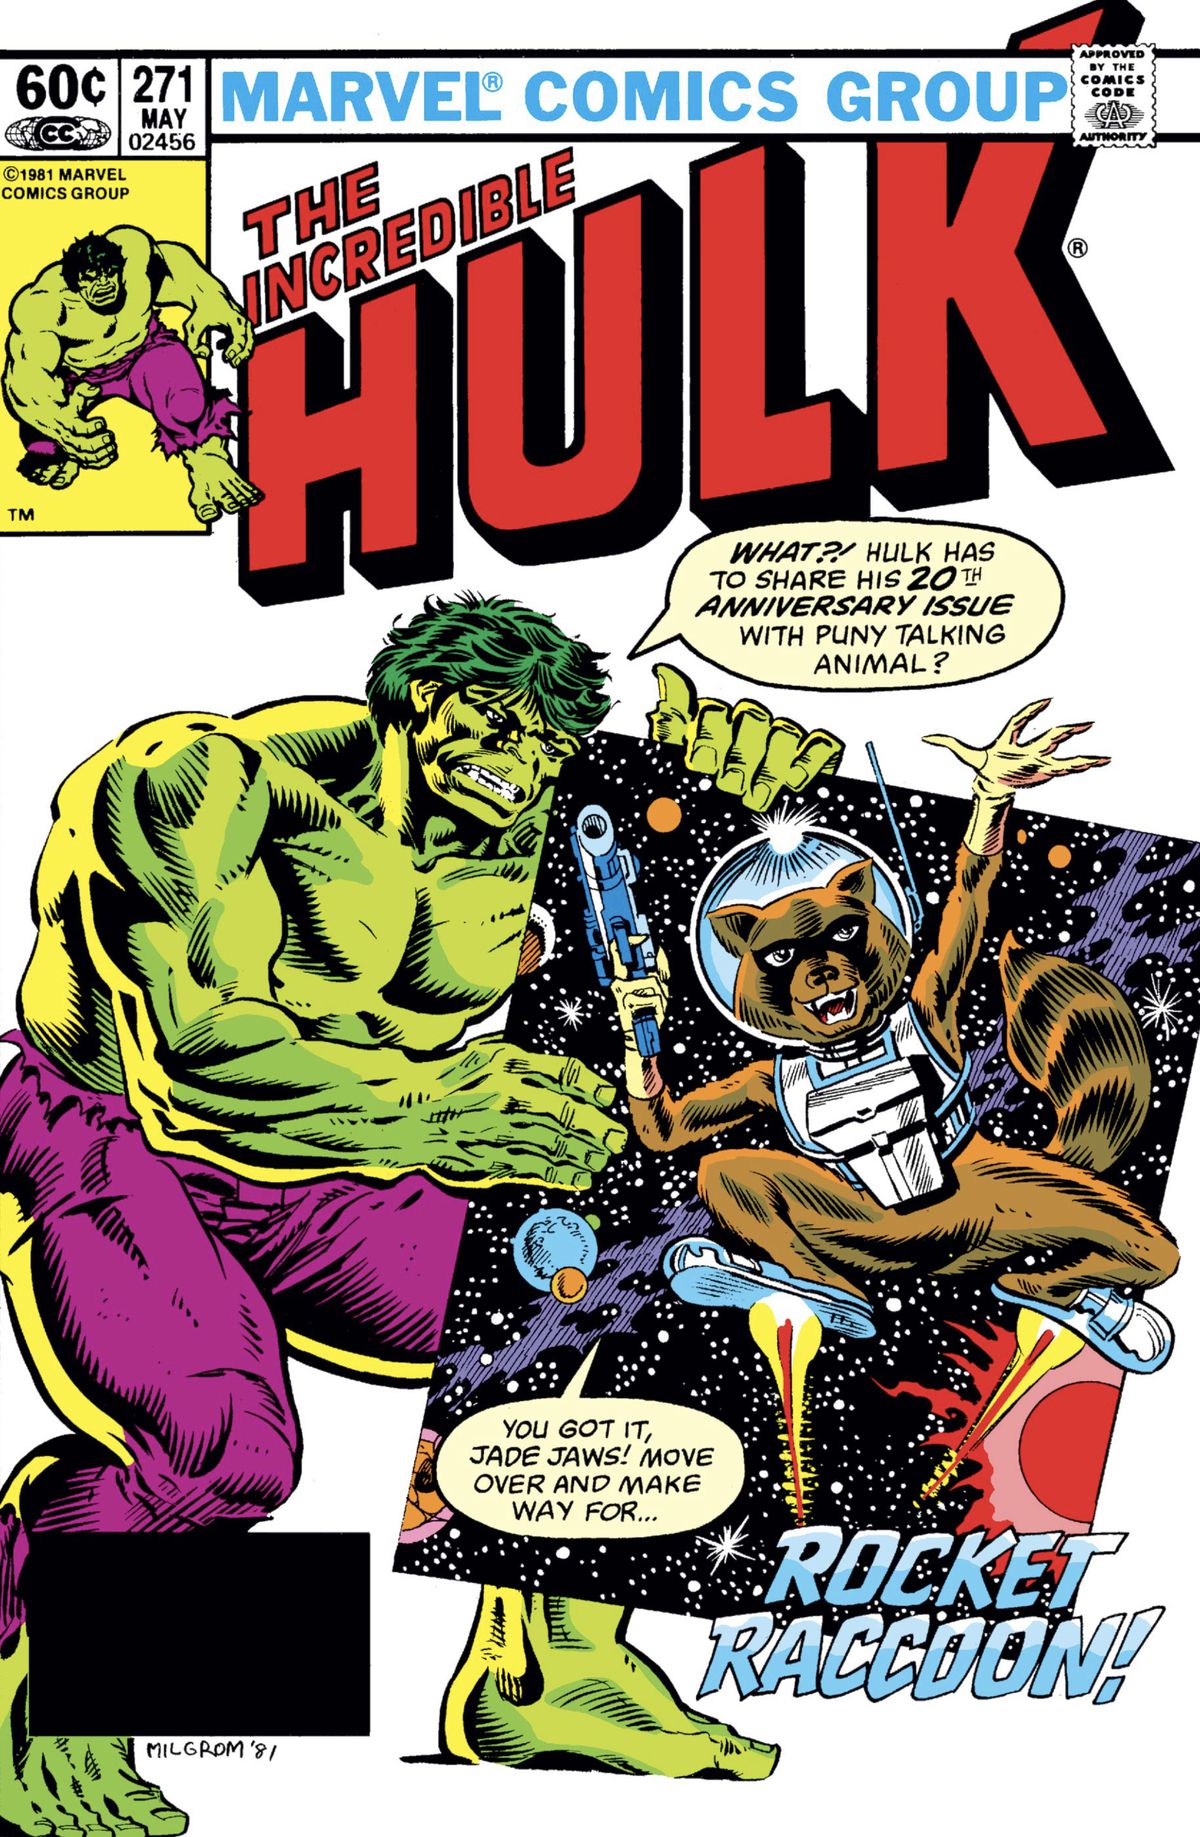 “What?!” the Hulk gripes on the cover of Incredible Hulk #271 (1982) “Hulk has to share his 20th anniversary issue with puny talking animal?” “You got it, Jade Jaws,” cries a raccoon cheerfully, wearing a space suit and rocket boots and holding a blaster, “Move over and make way for Rocket Raccoon!” 